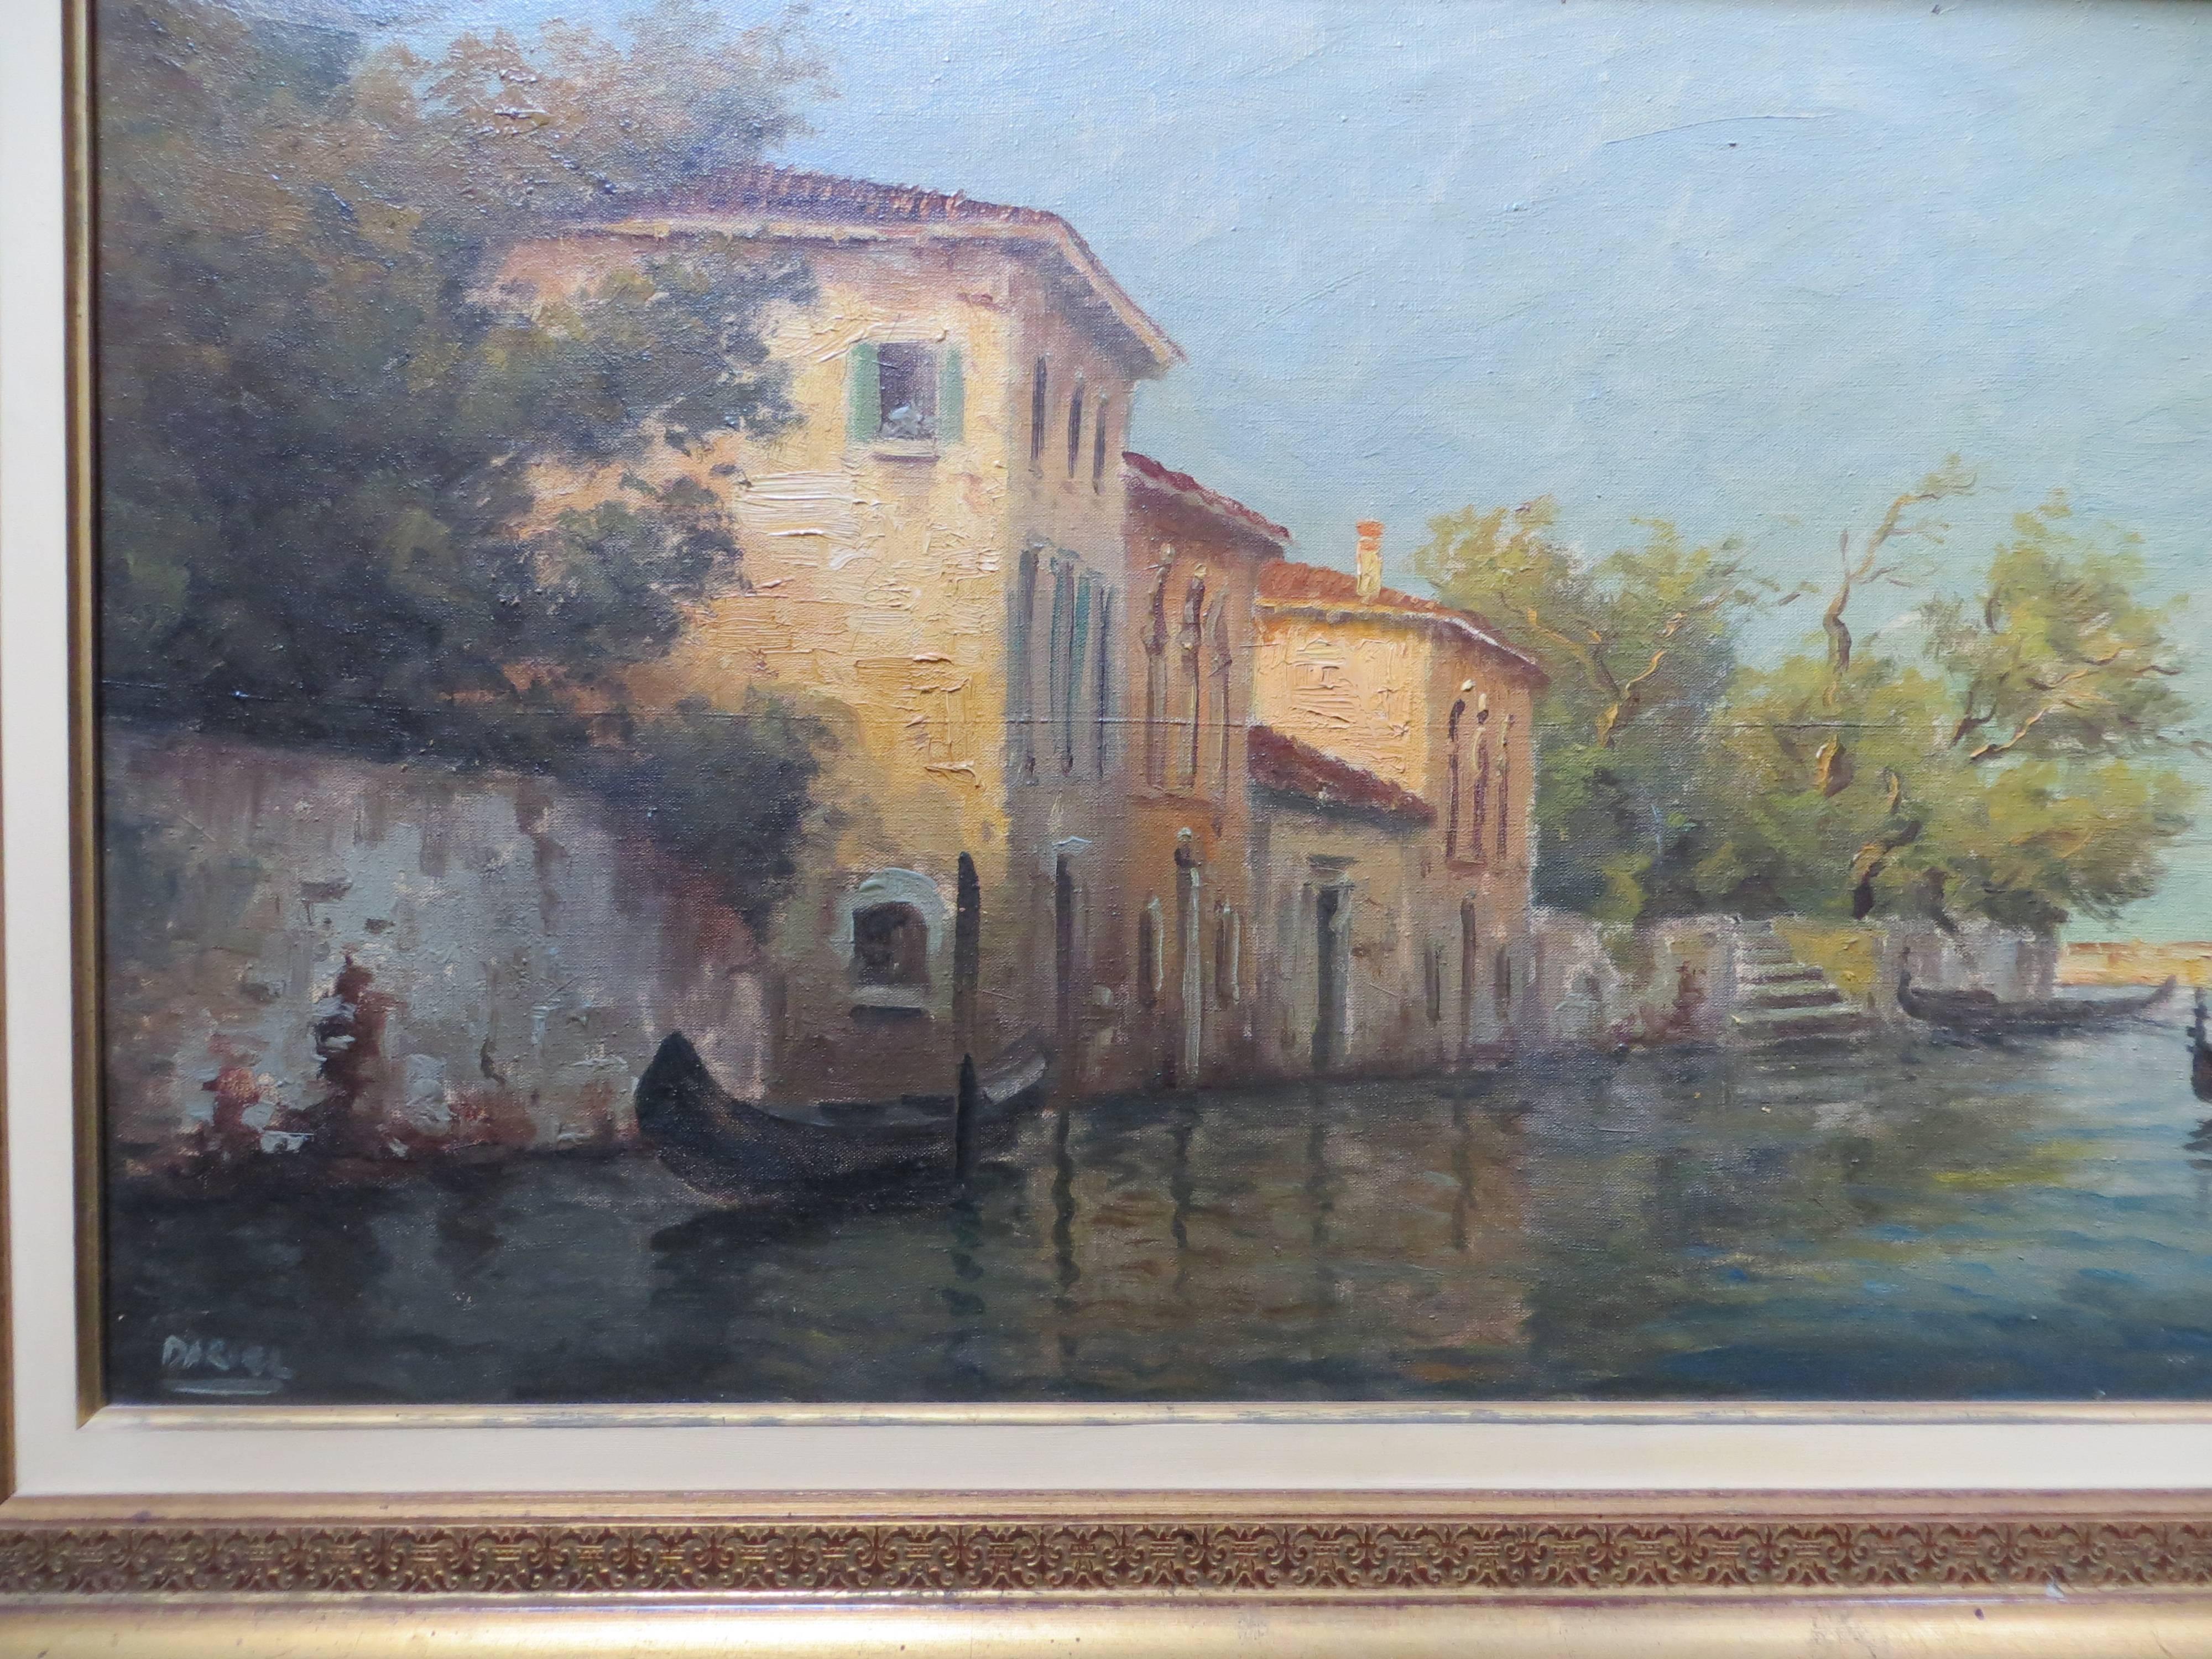  The Grand Canal in Venice - Painting by Unknown